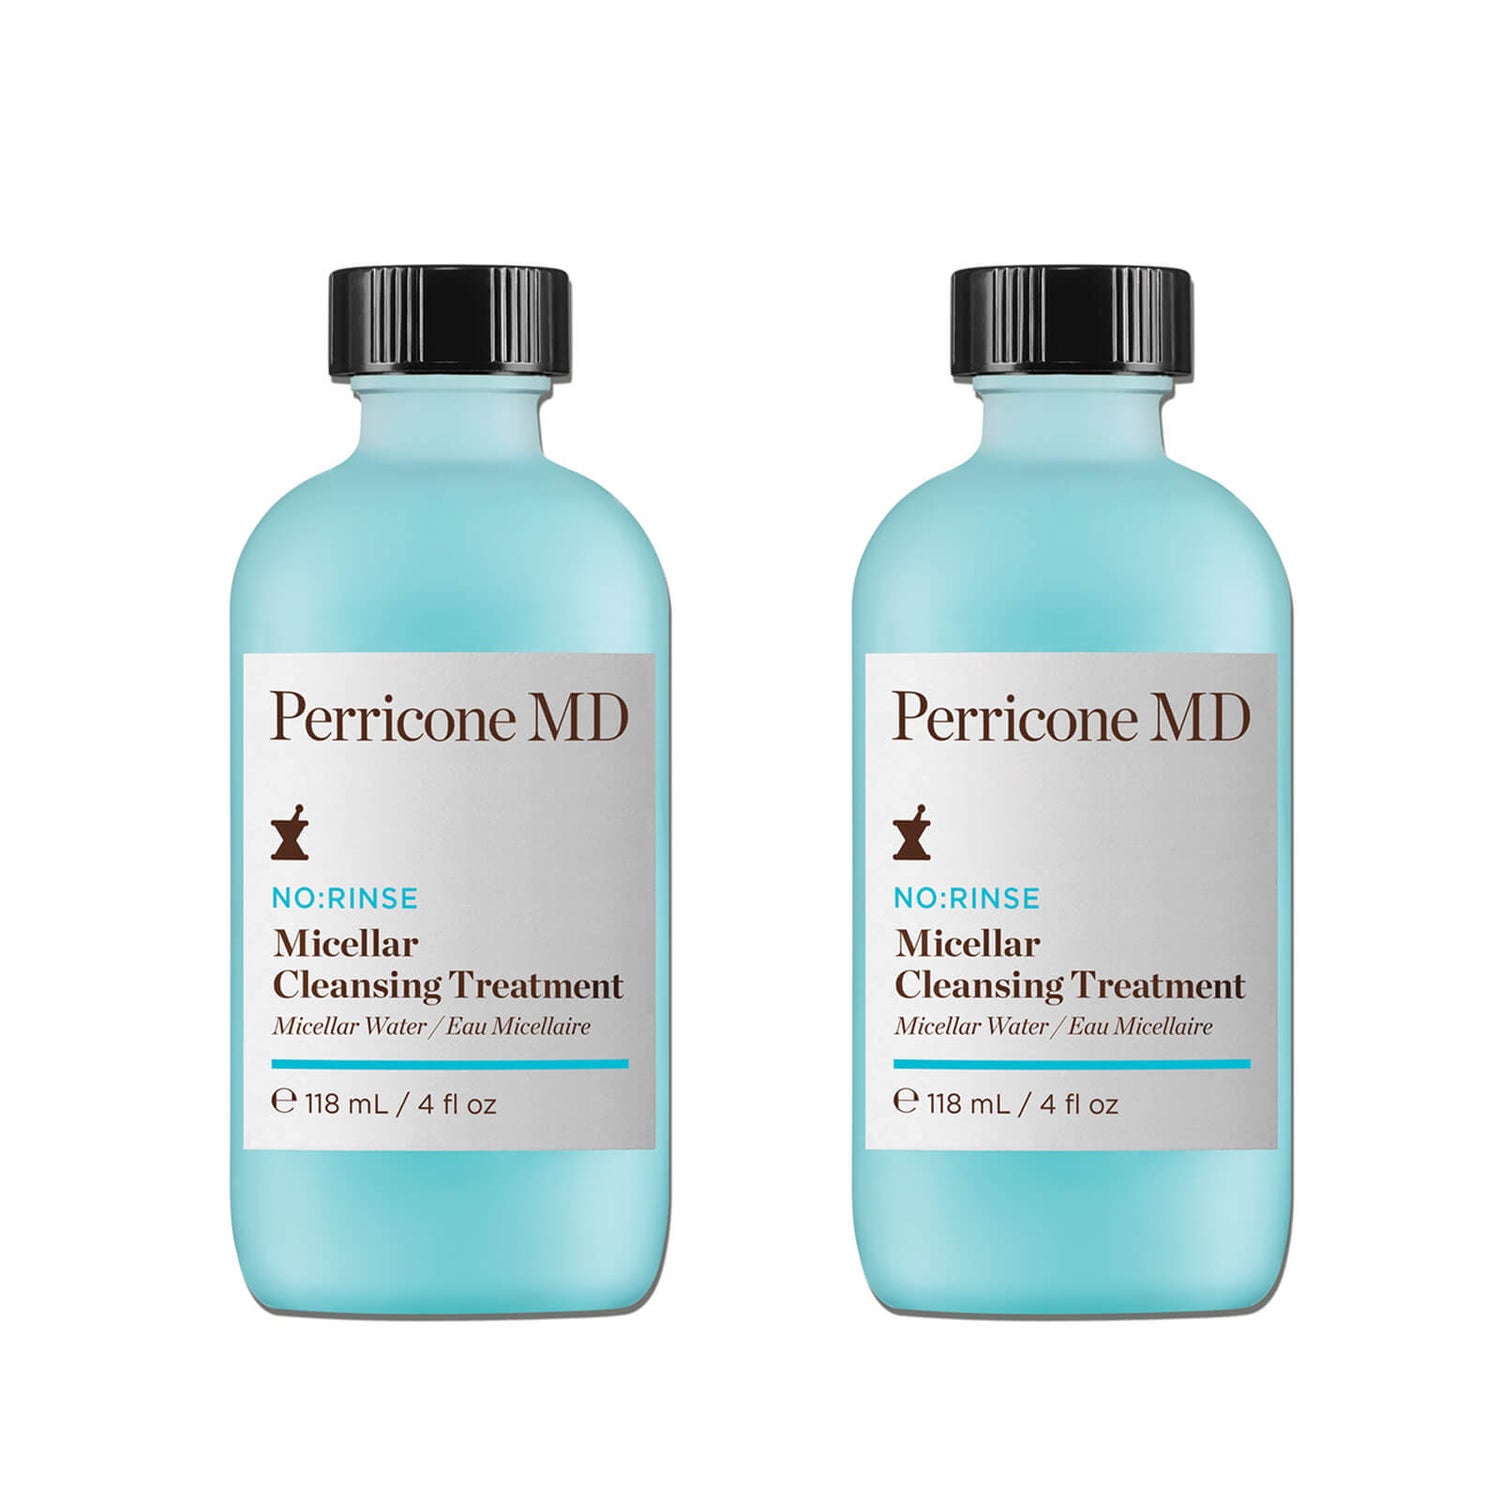 Micellar Cleansing Treatment Duo